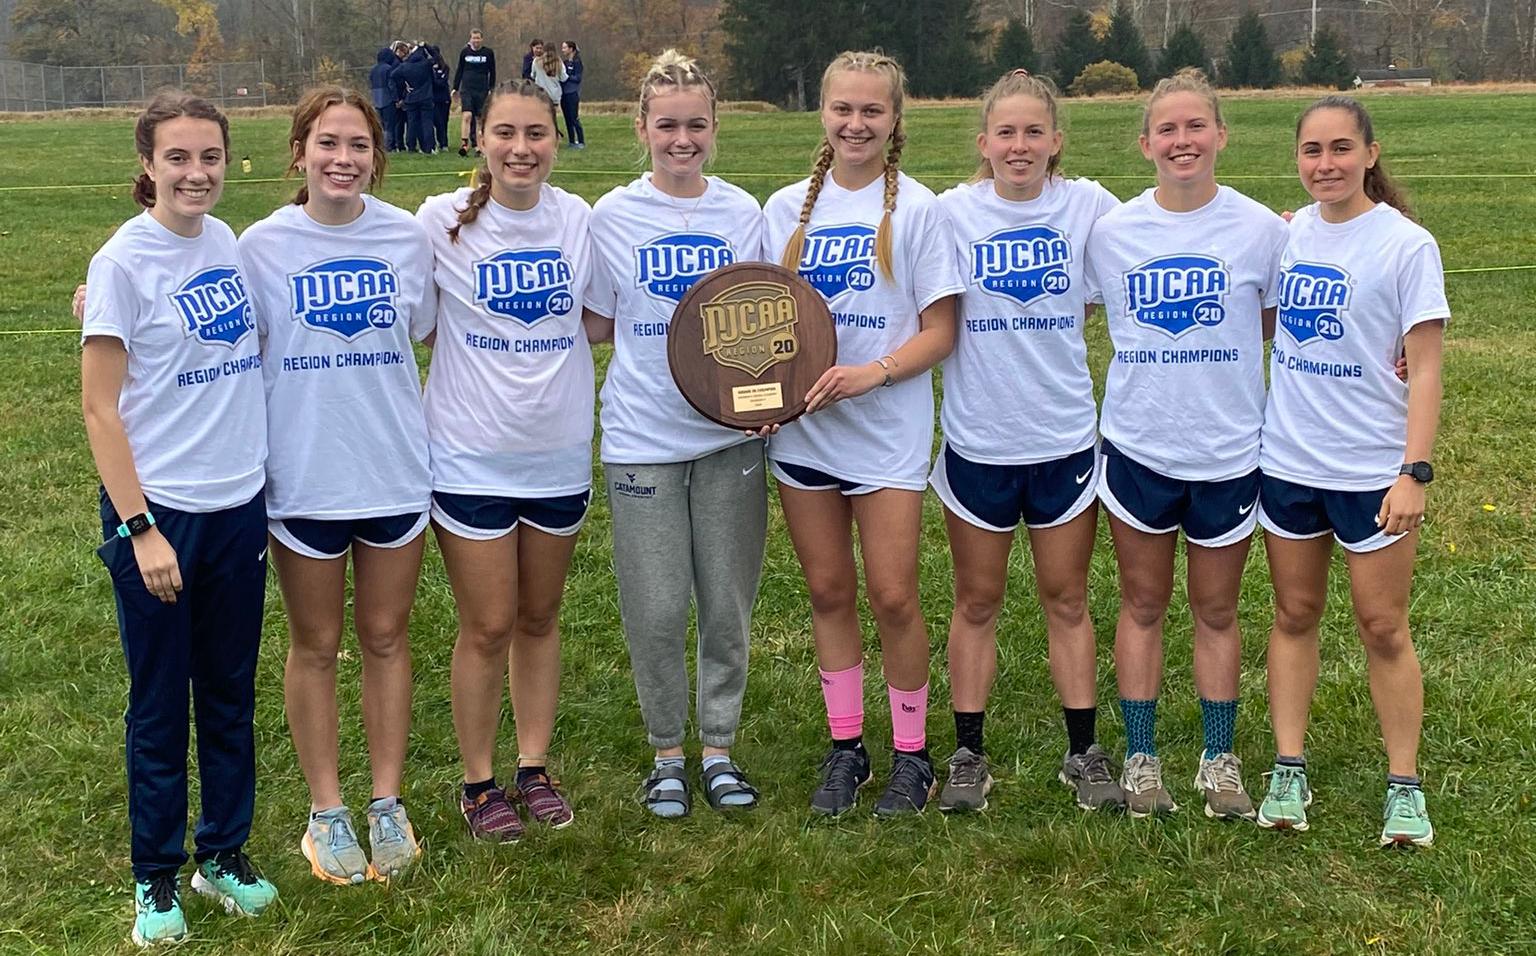 Potomac State Wins Region 20 DII Women's Cross Country Title